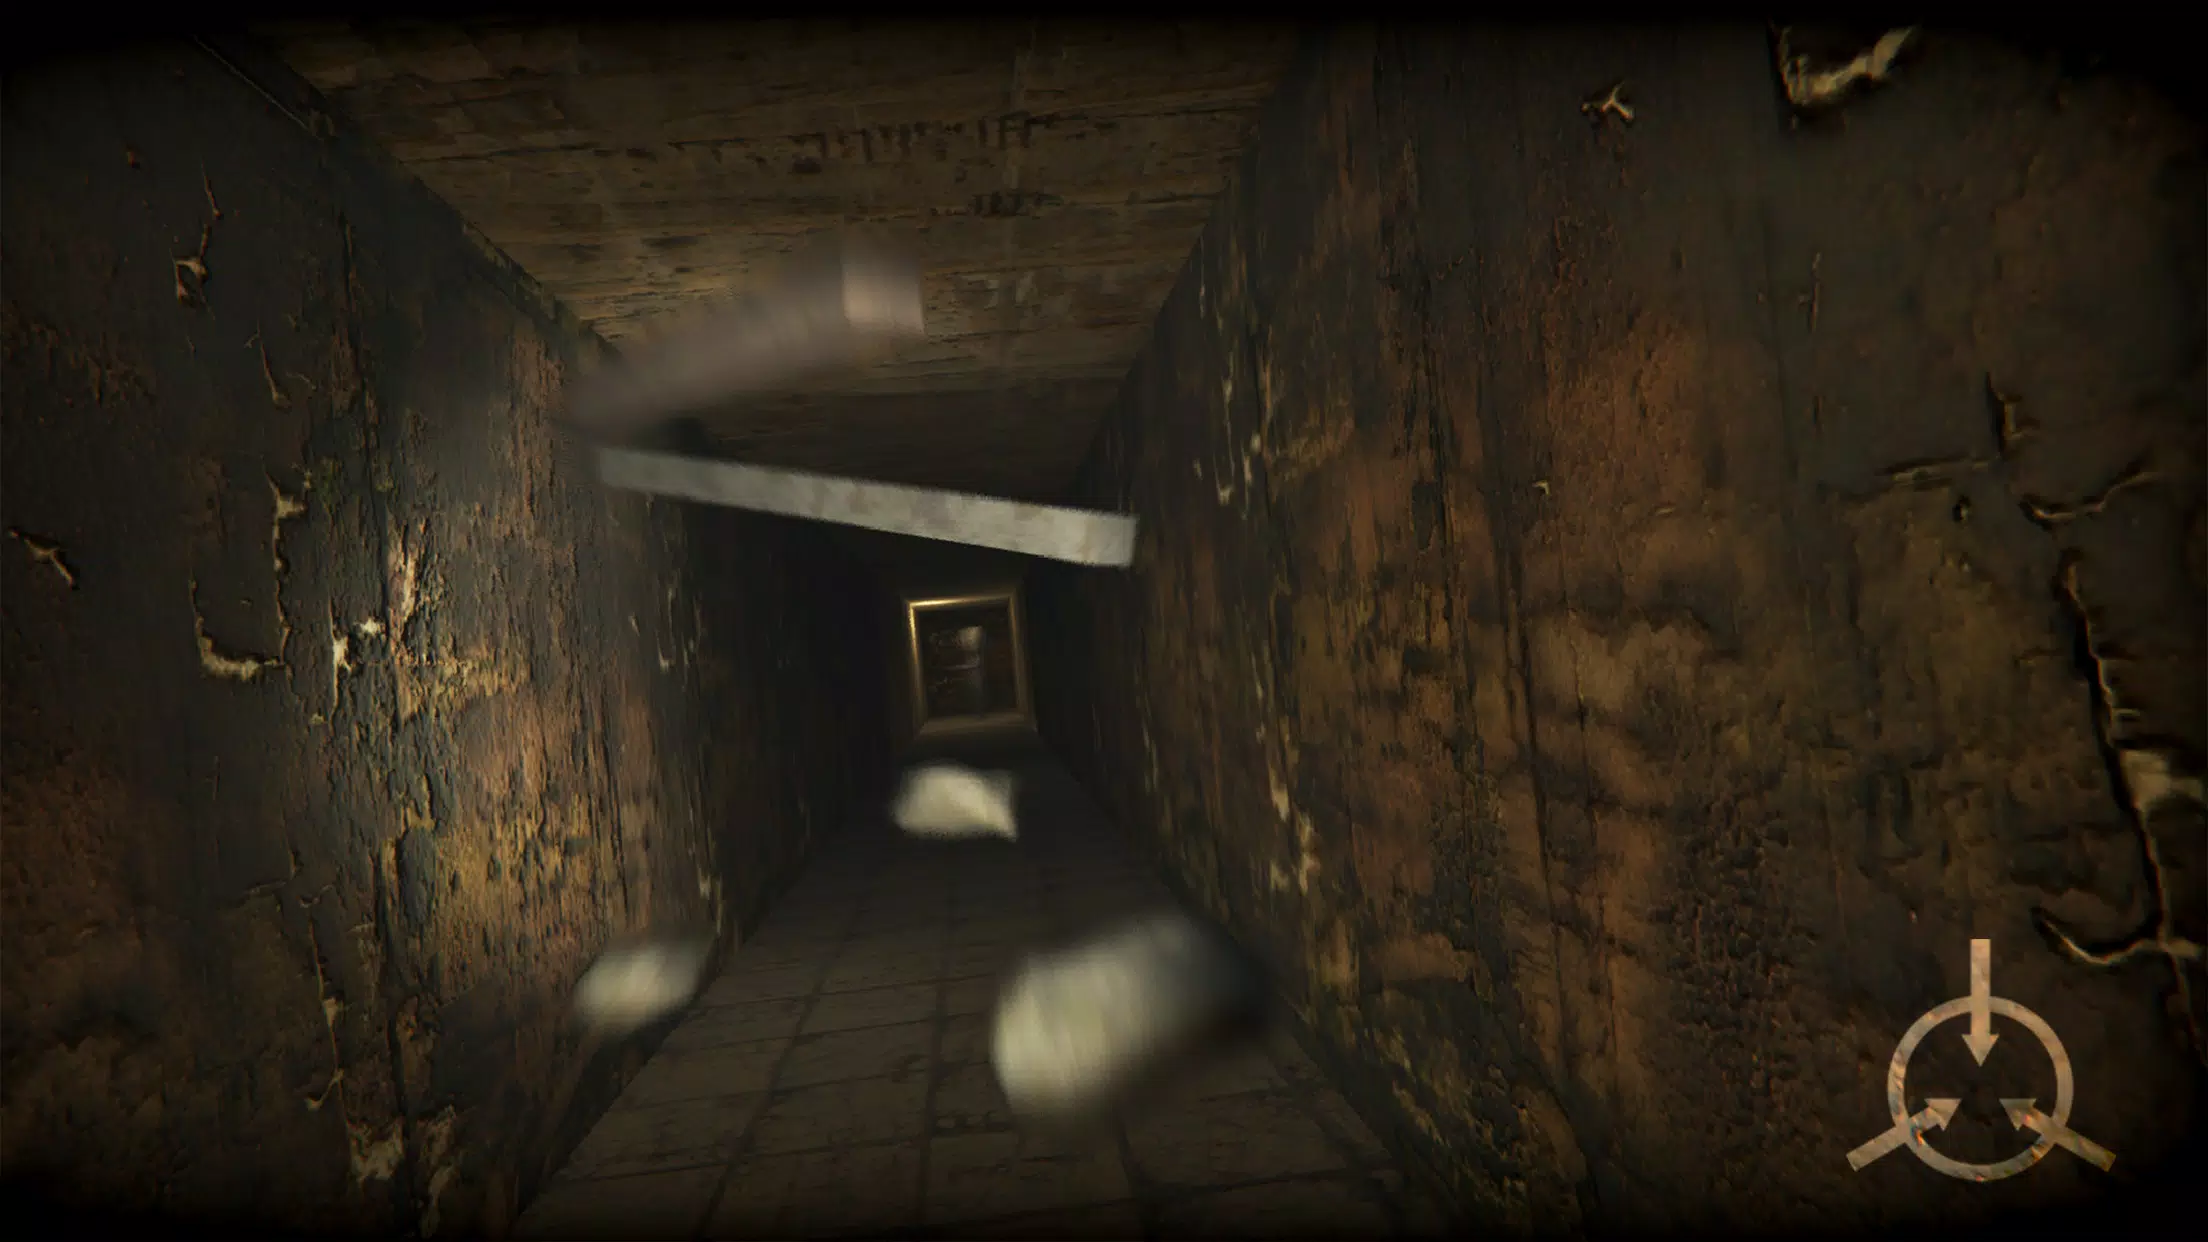 SCP - Containment Breach APK for Android Download